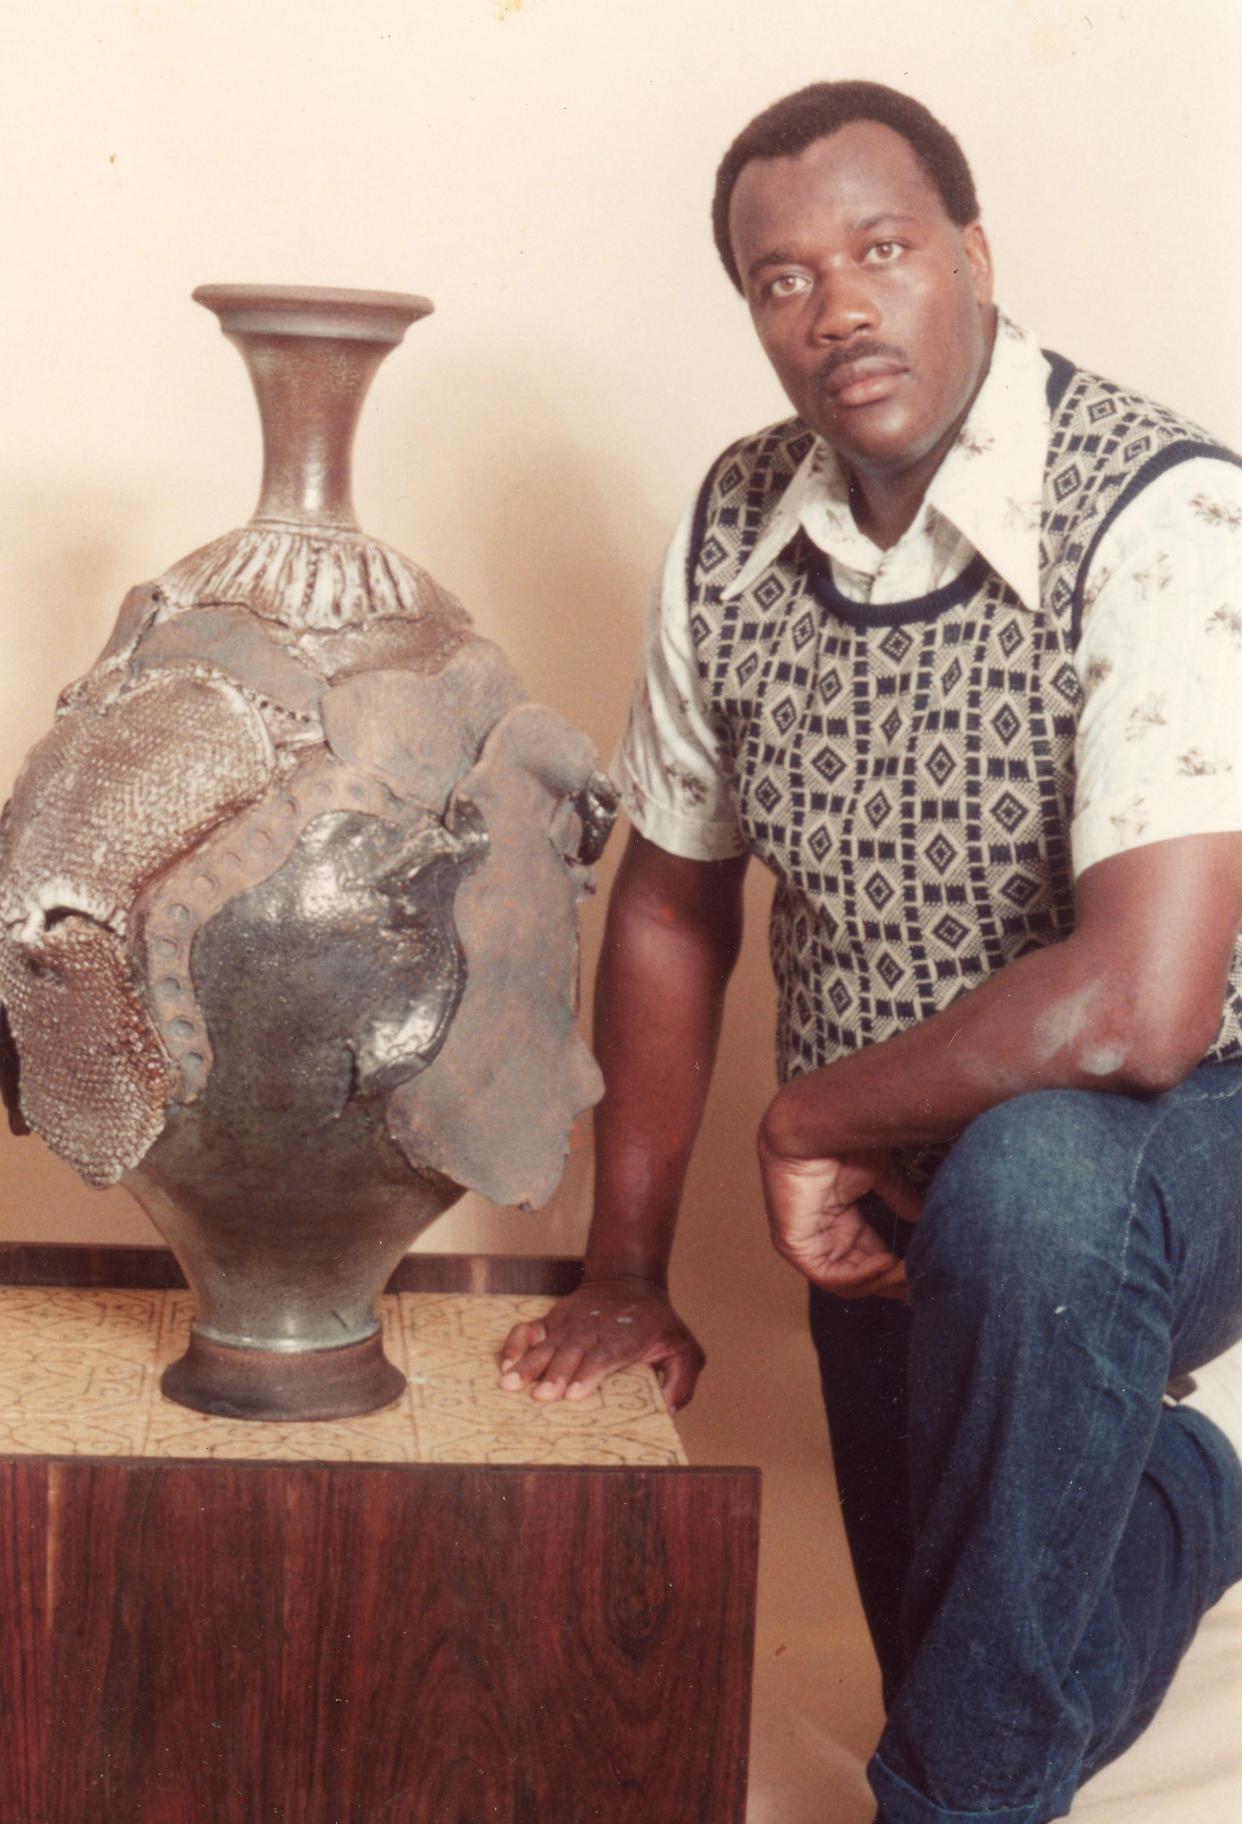 Artist Nathaniel Bustion Jr. is shown with one of his ceramic pieces.